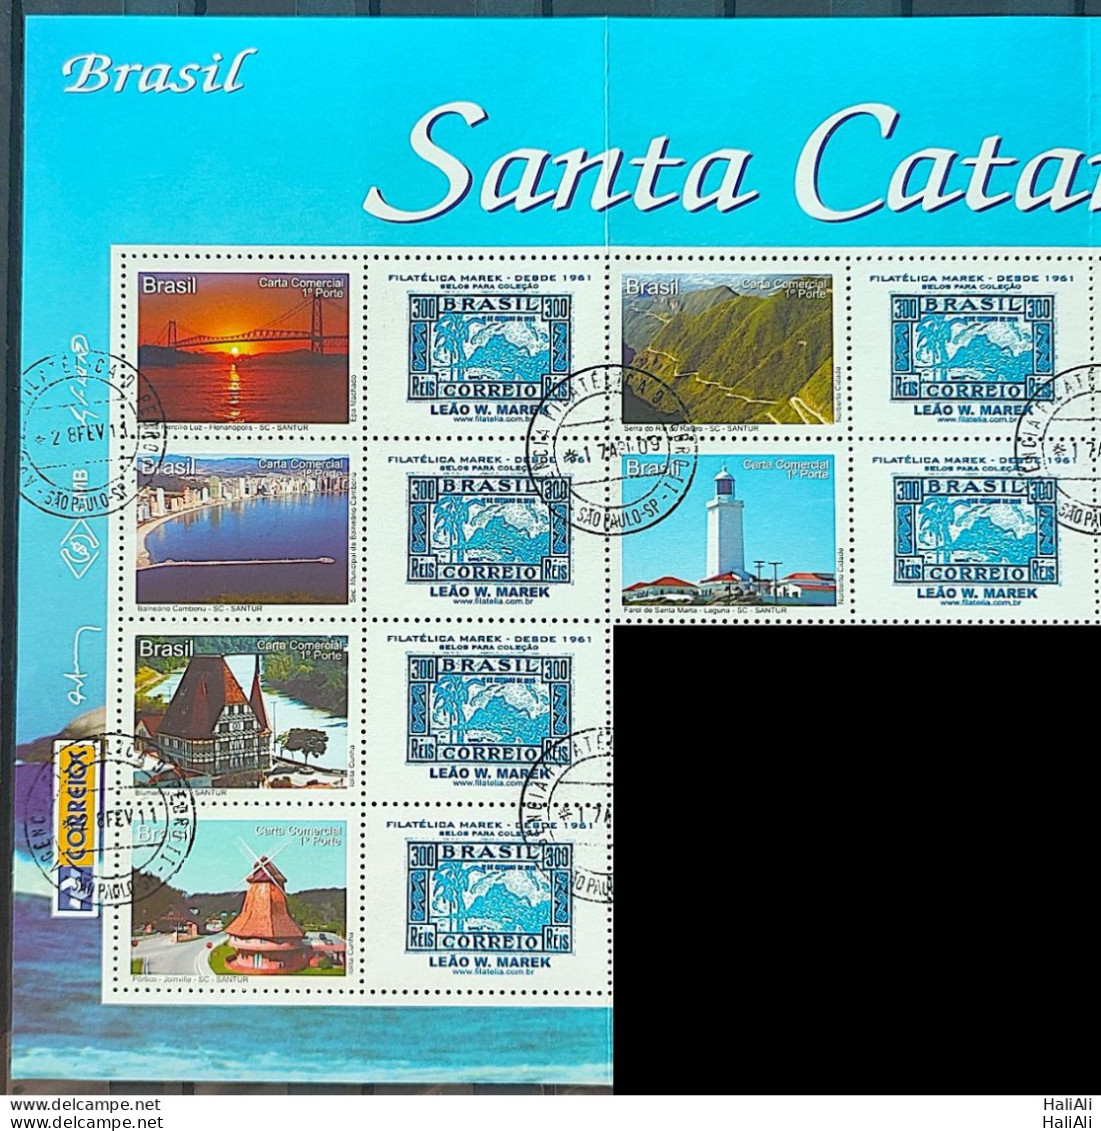 C 2783 Brazil Personalized Stamp Santa Catarina 2009 CPD SP Left Side Od The Sheet Very Rare - Personalized Stamps